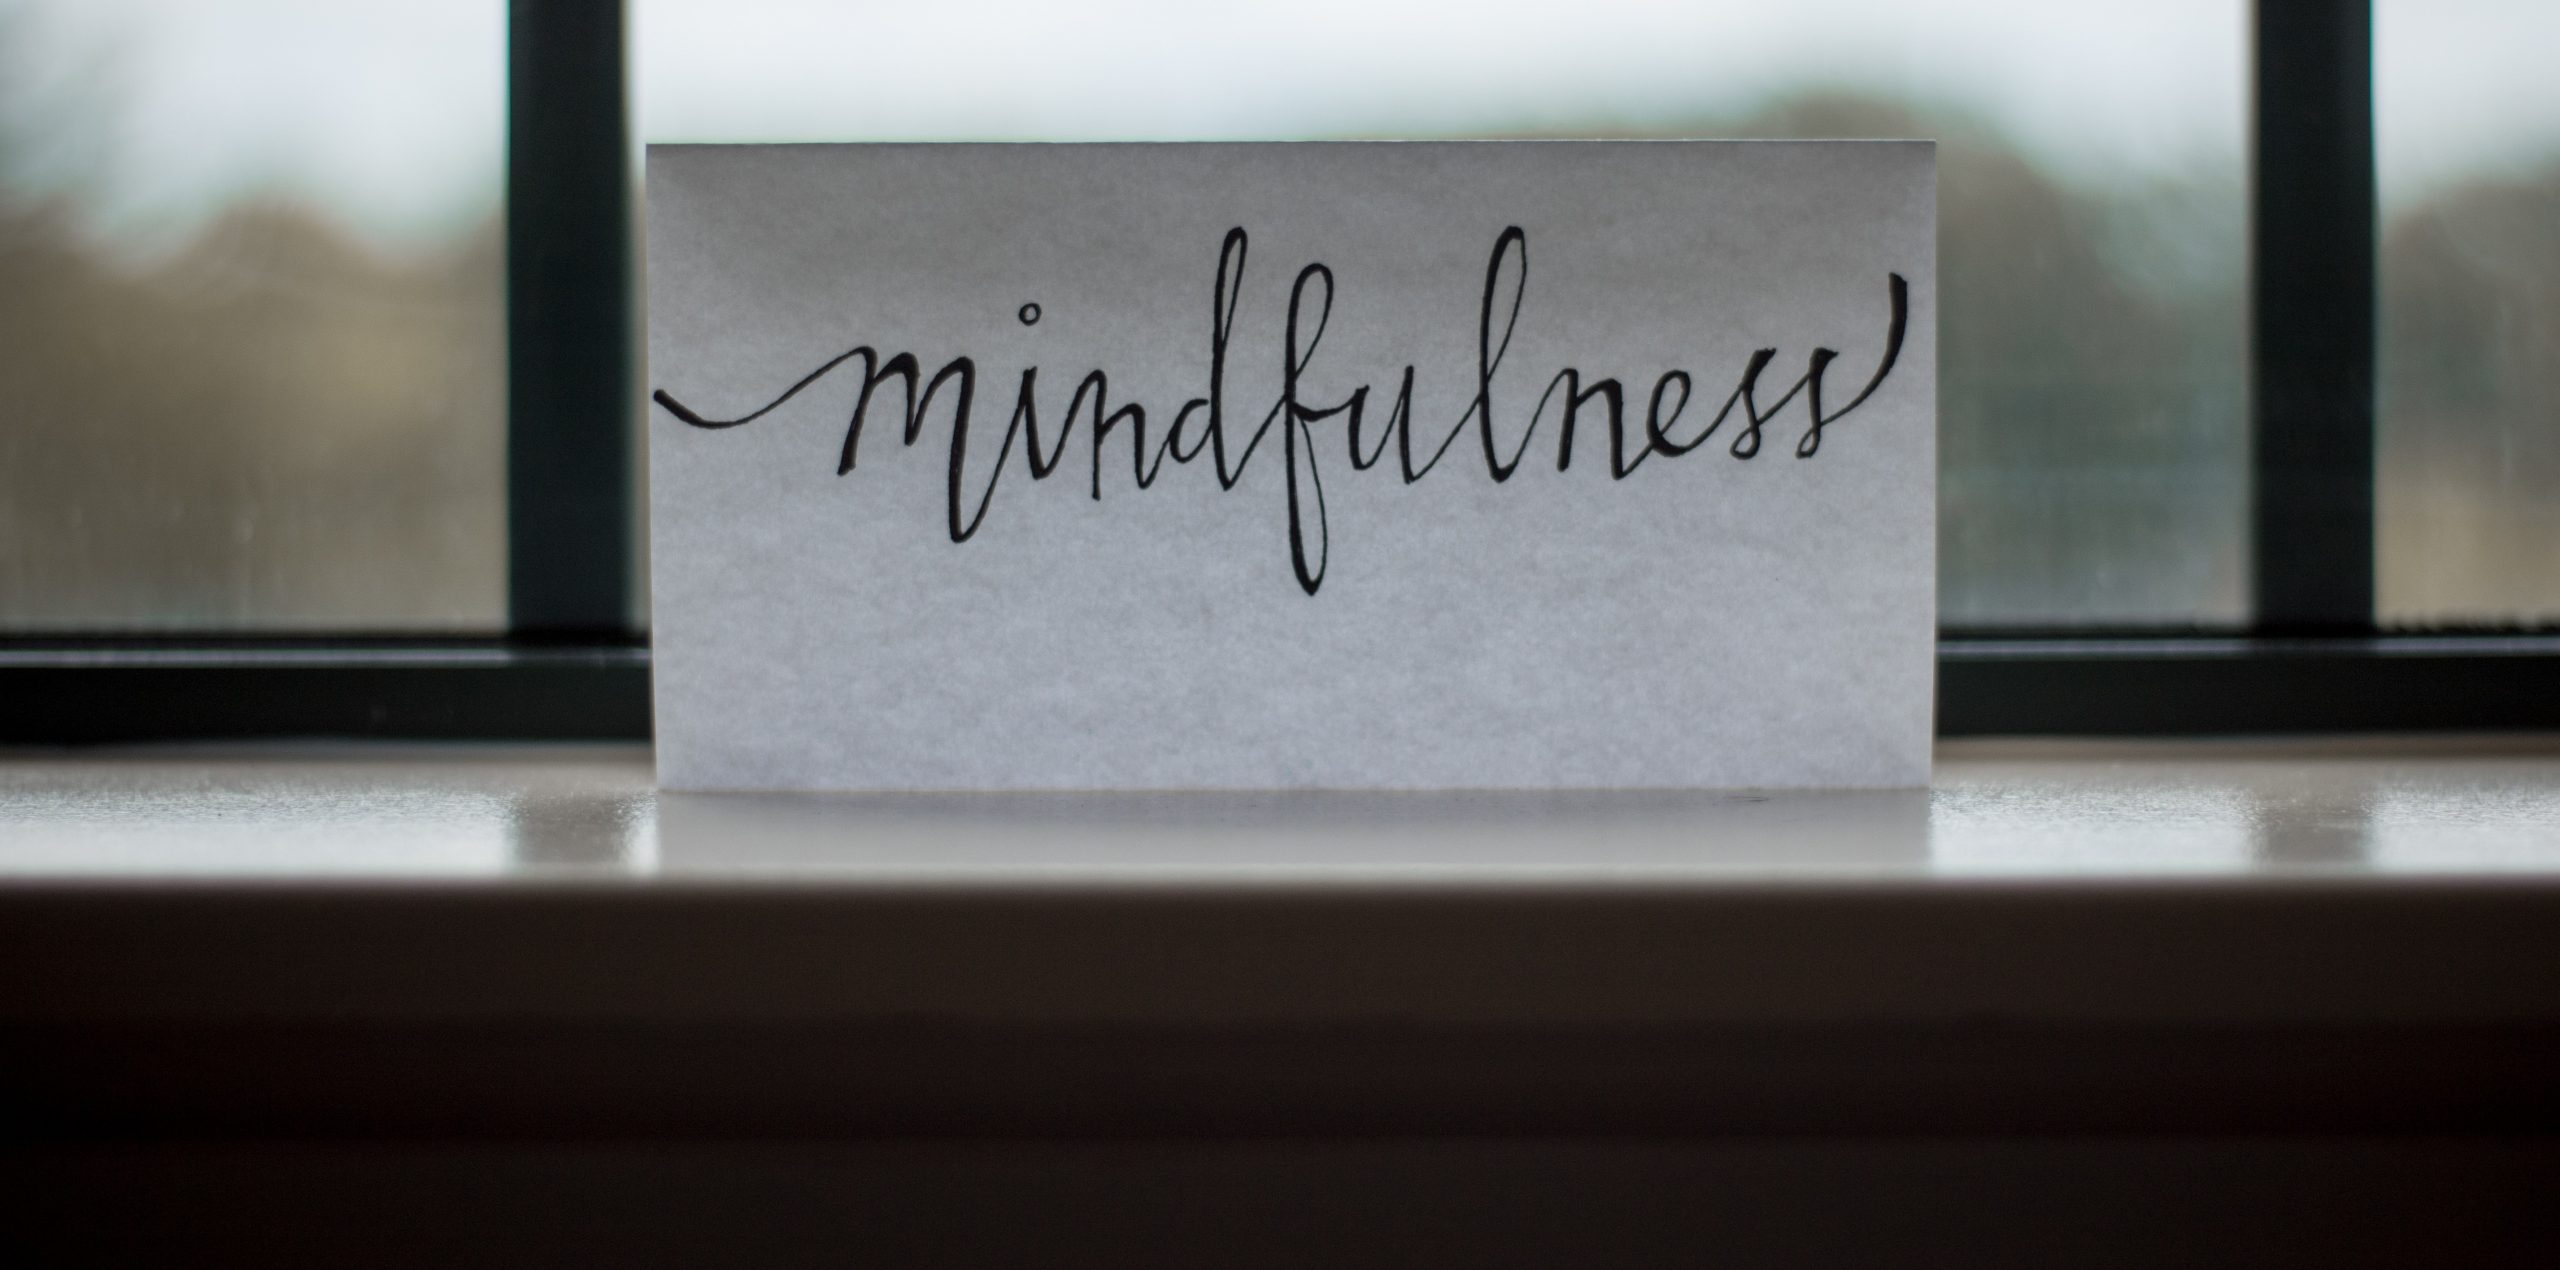 Mindfulness- thoughts